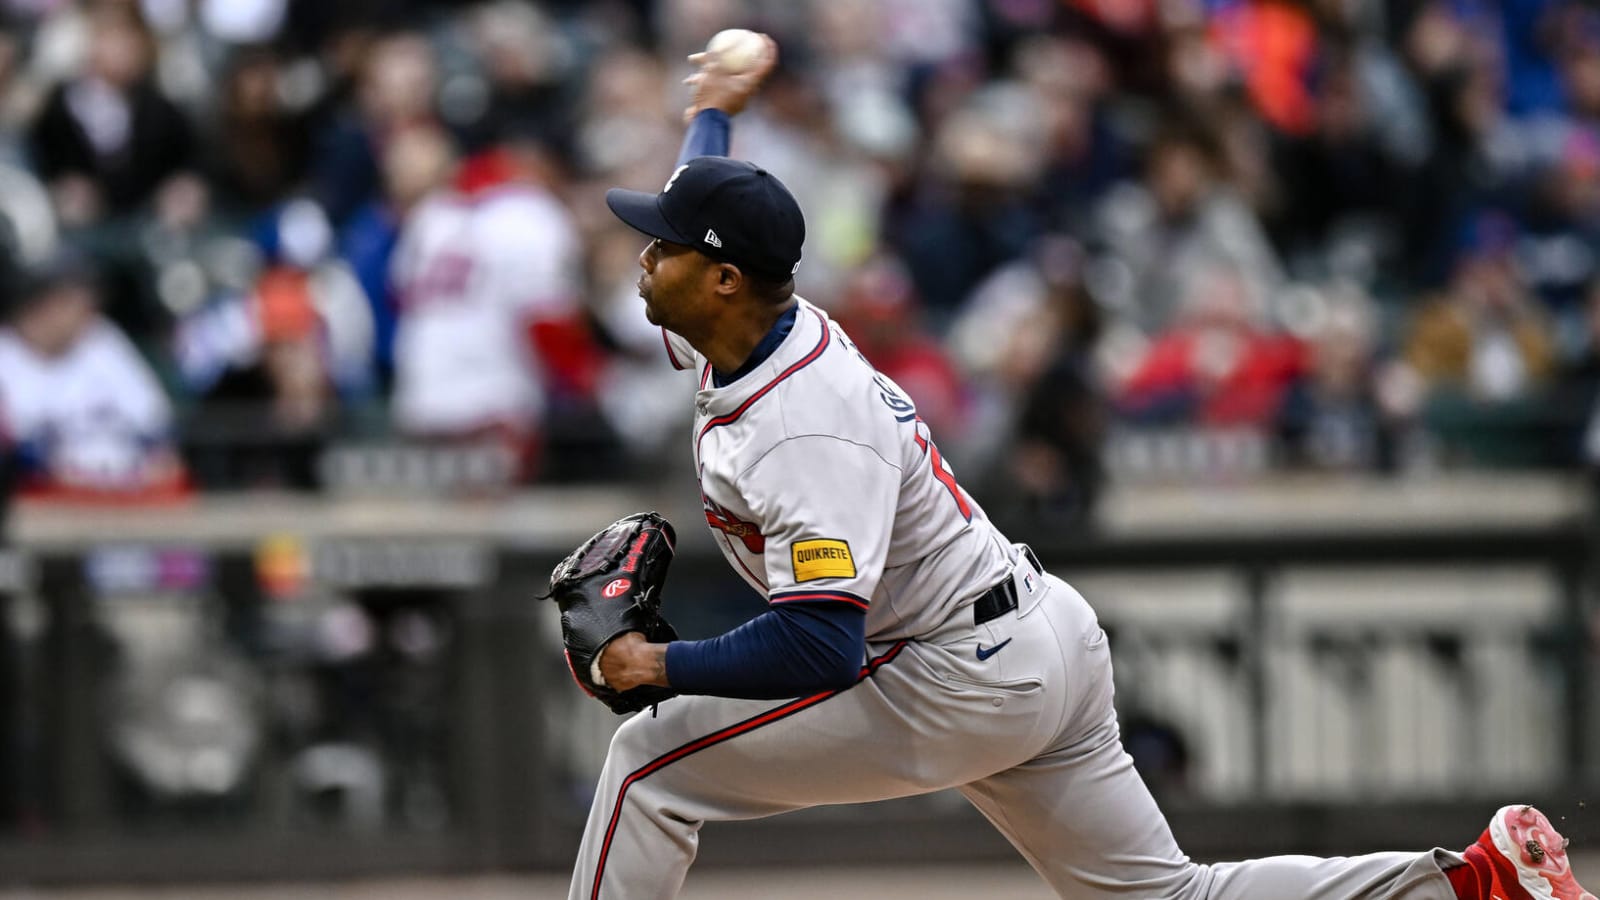 Watch: Braves lose no-hitter in the most brutal fashion